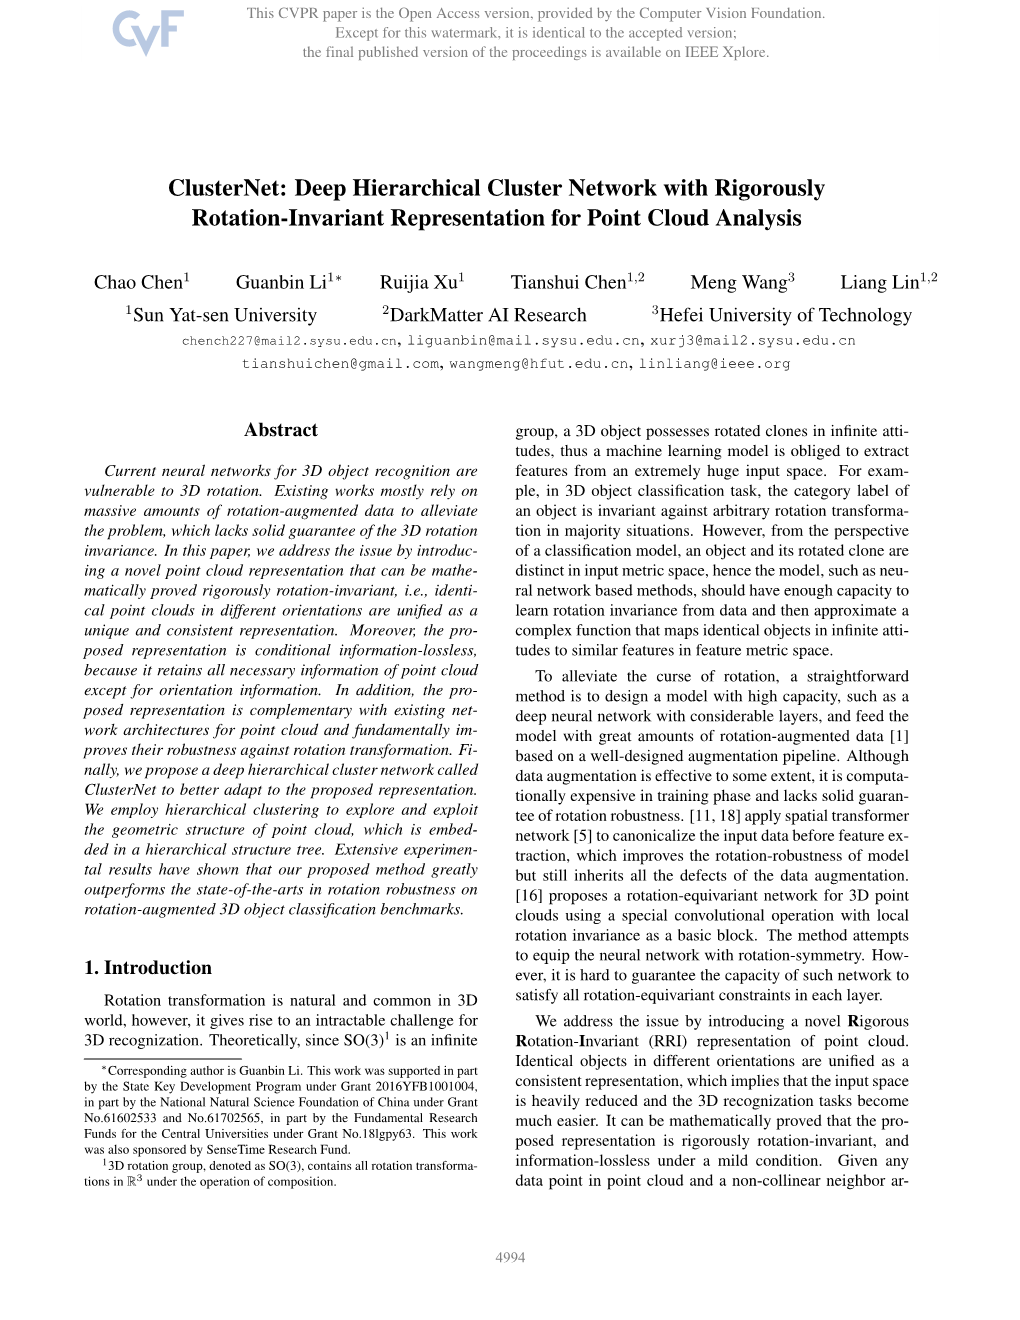 Clusternet: Deep Hierarchical Cluster Network with Rigorously Rotation-Invariant Representation for Point Cloud Analysis